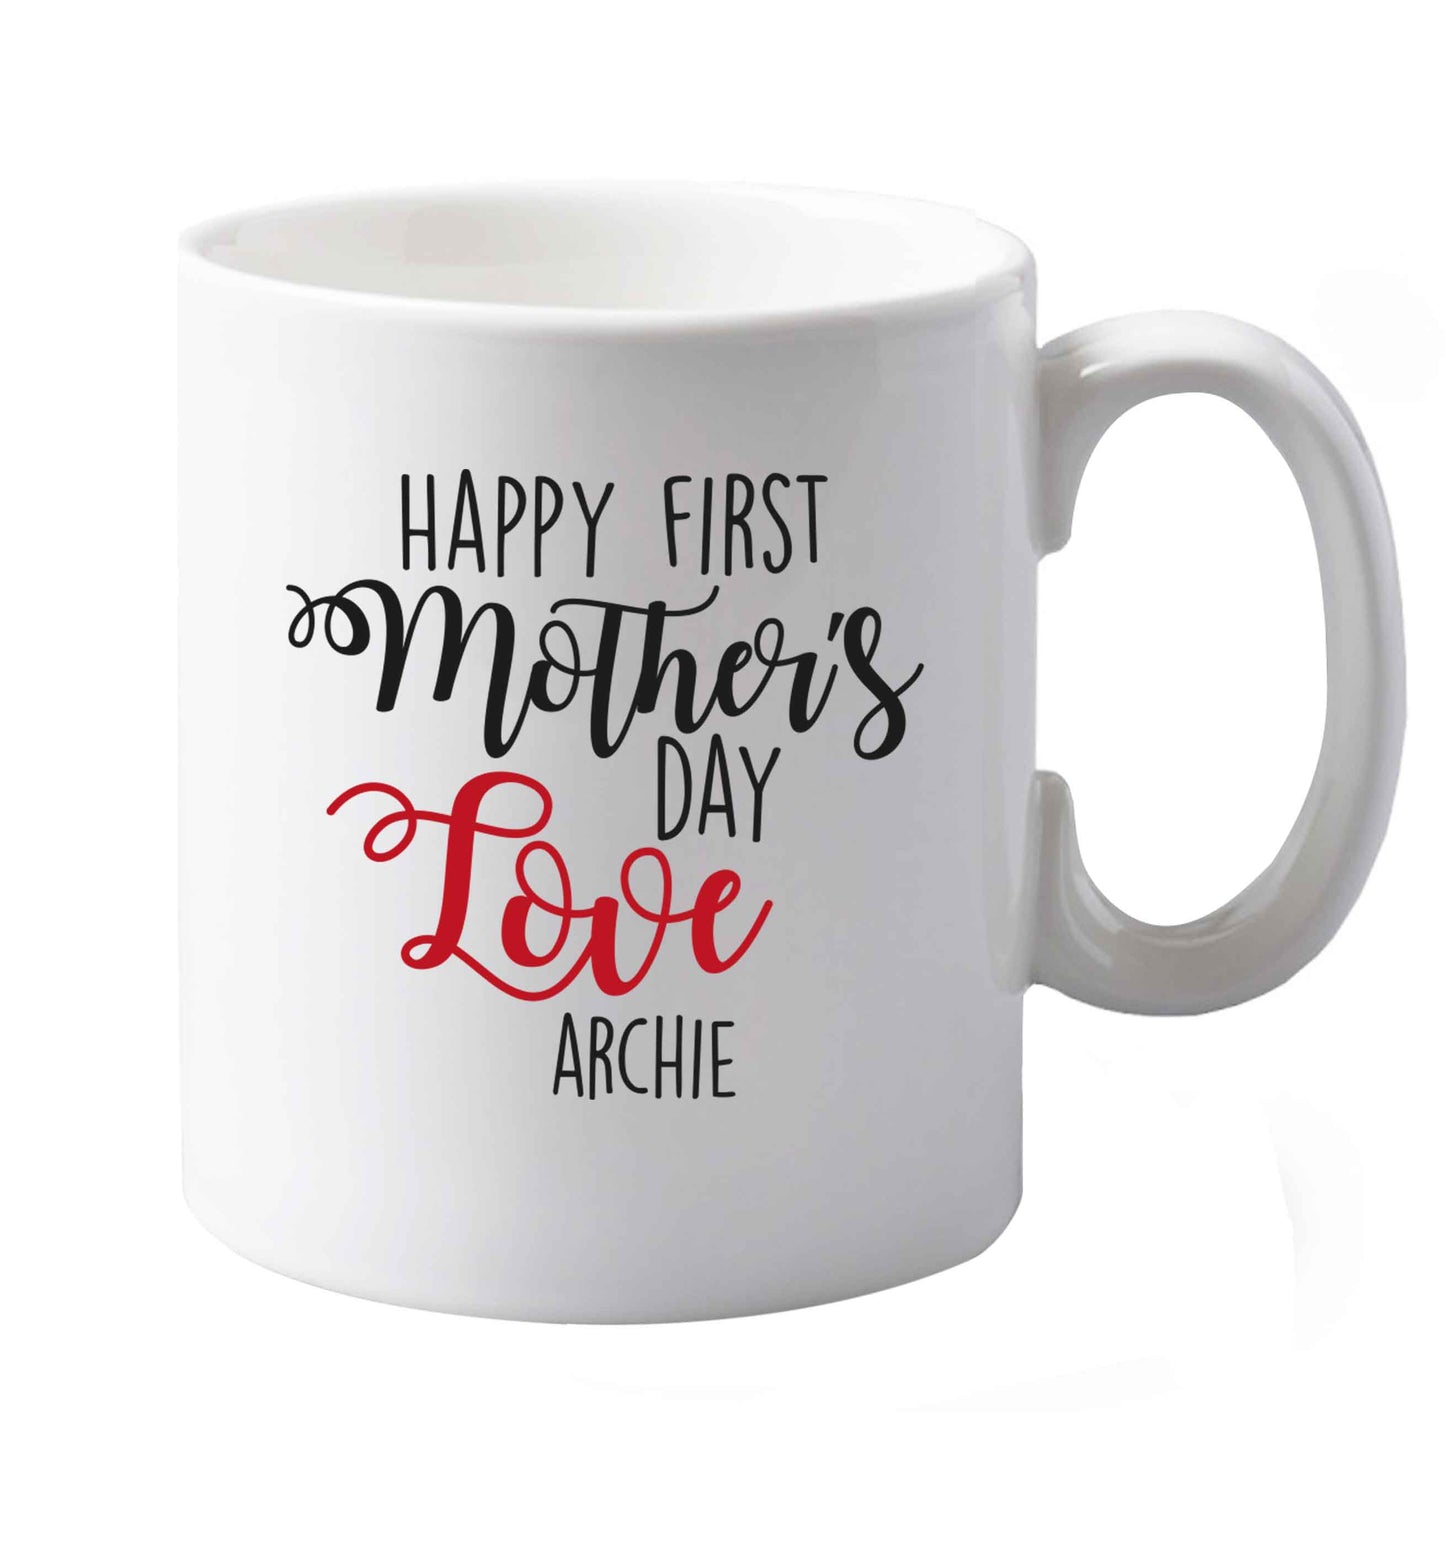 10 oz Personalised happy first mother's day love ceramic mug both sides